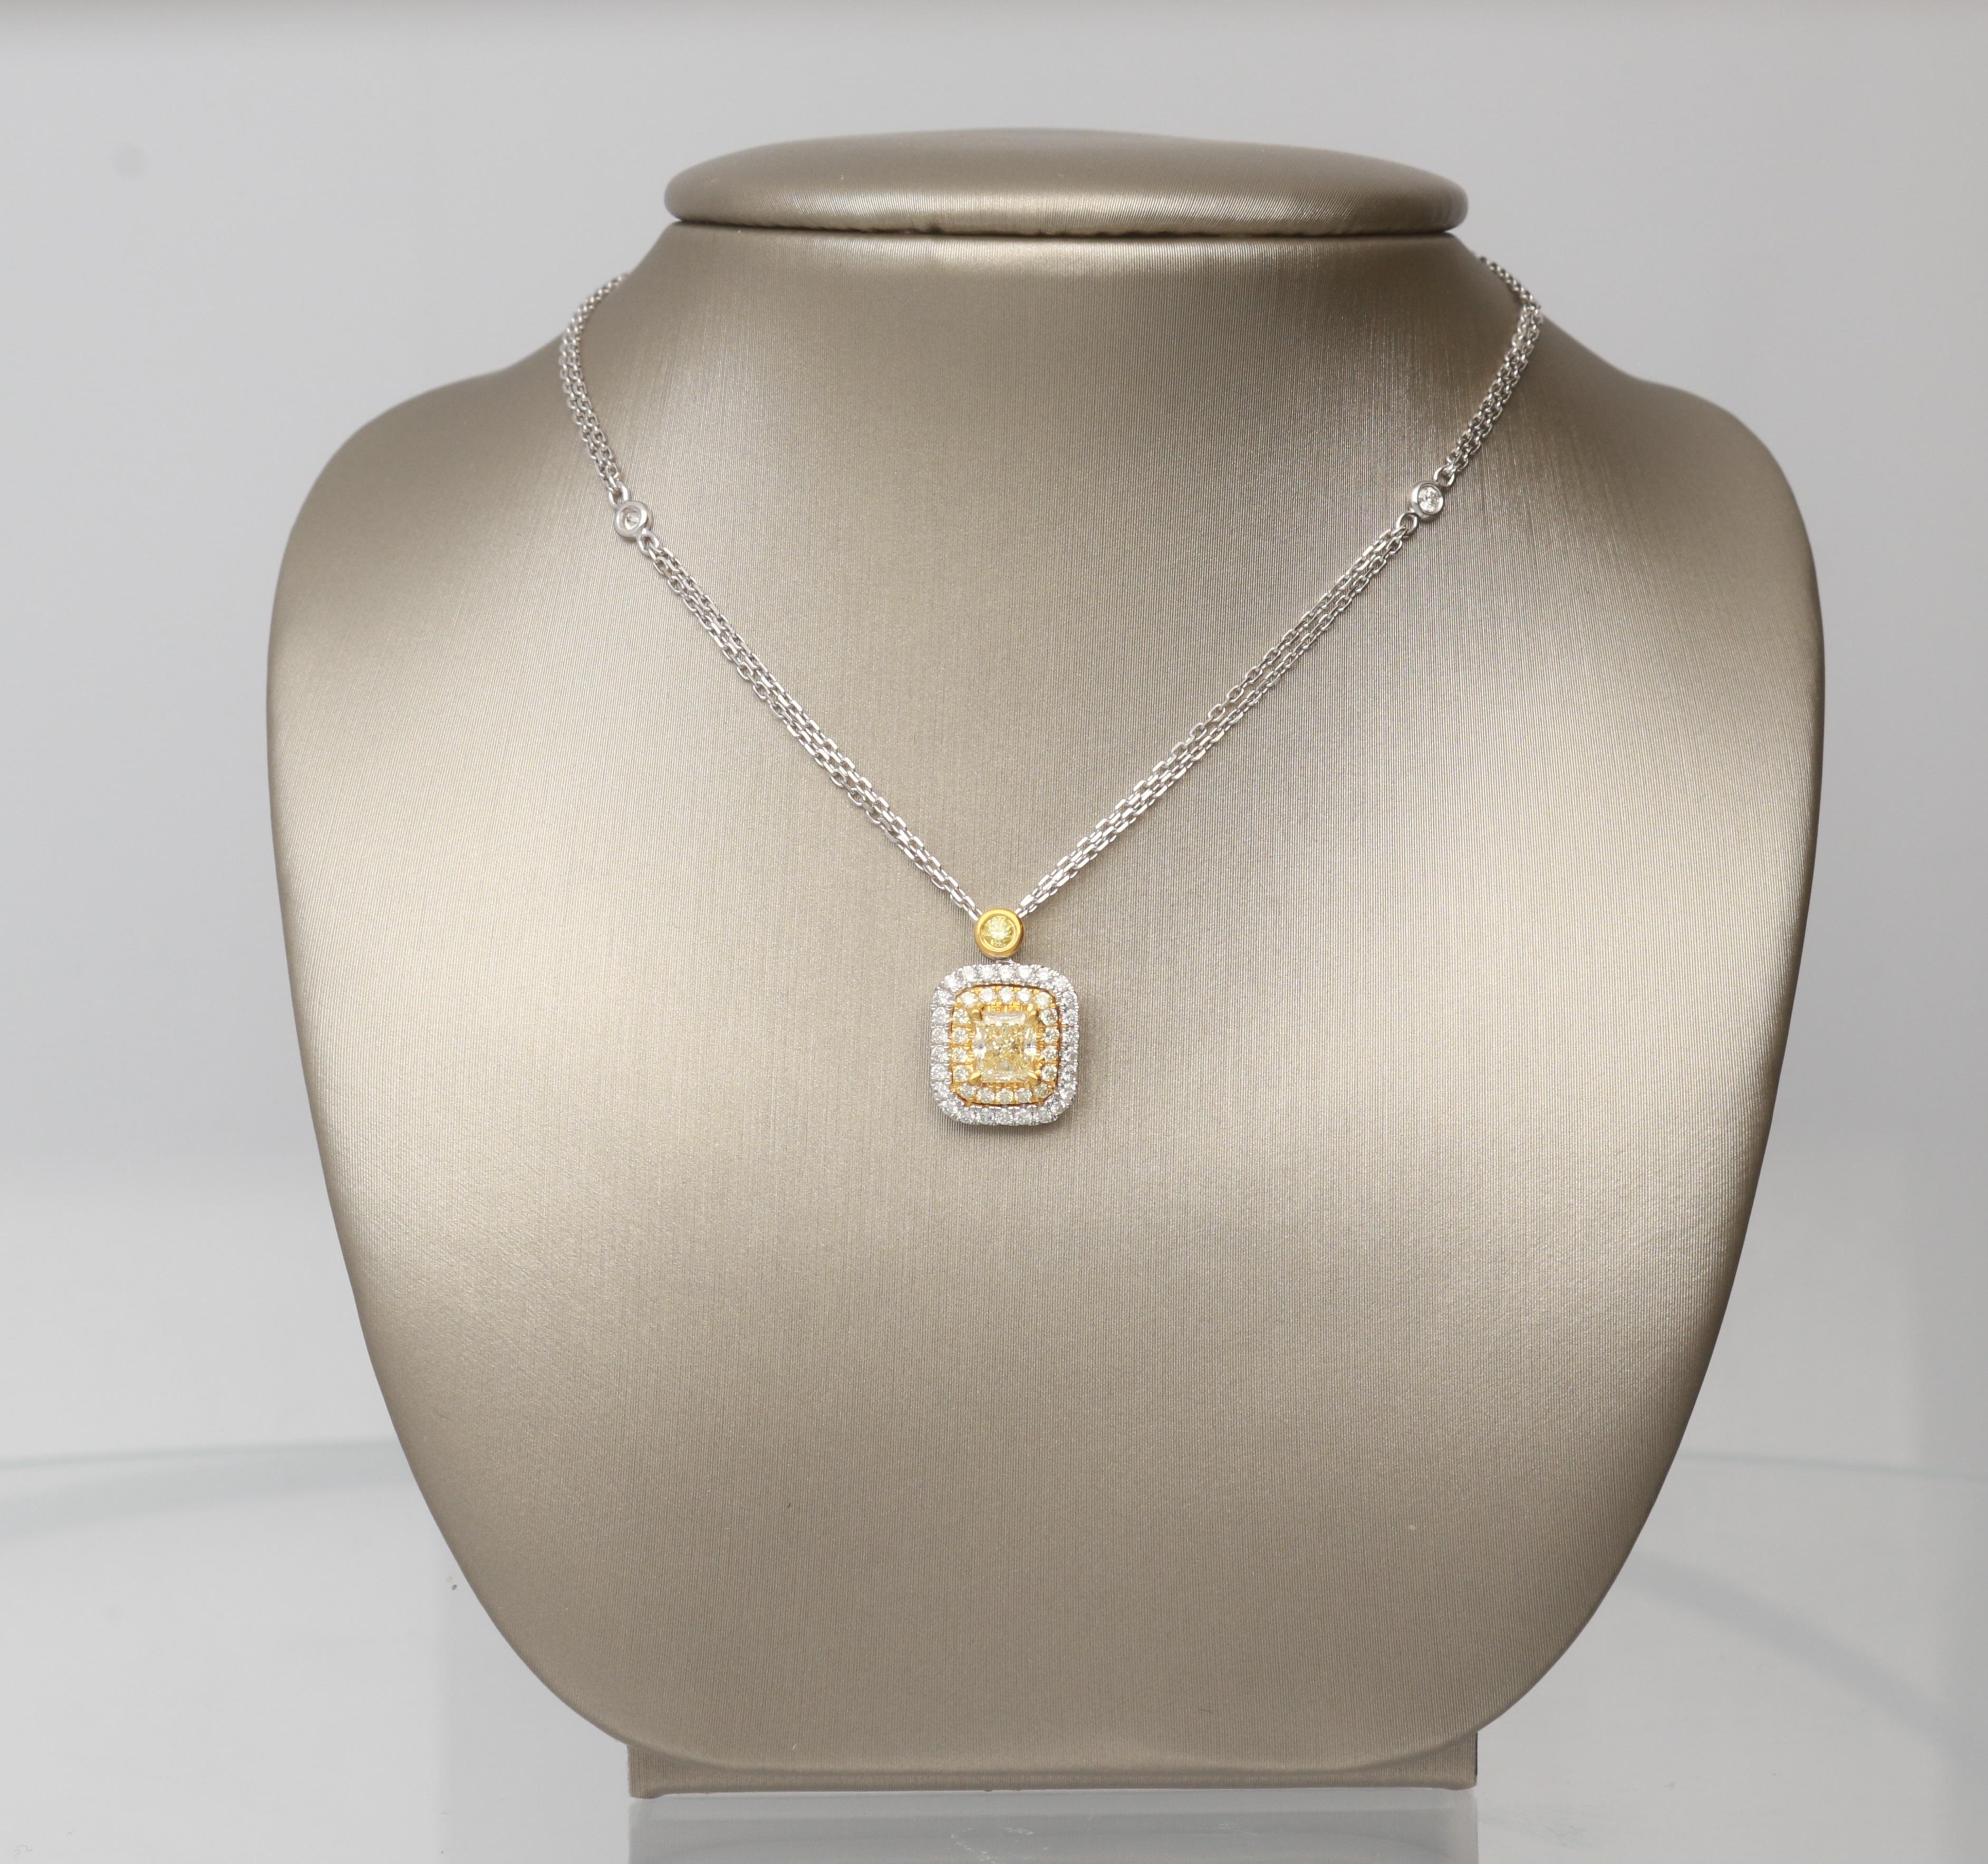 This beautiful Necklace is crafted in 18-karat Two Tone gold and features a cushion cut Yellow Diamond 1/2 Carat, surrounded by 17 Yellow Diamonds 0.14 Carat & 28 Round Diamonds 0.21 Carat with GH- SI quality.  
This Necklace comes with 16+2 inch